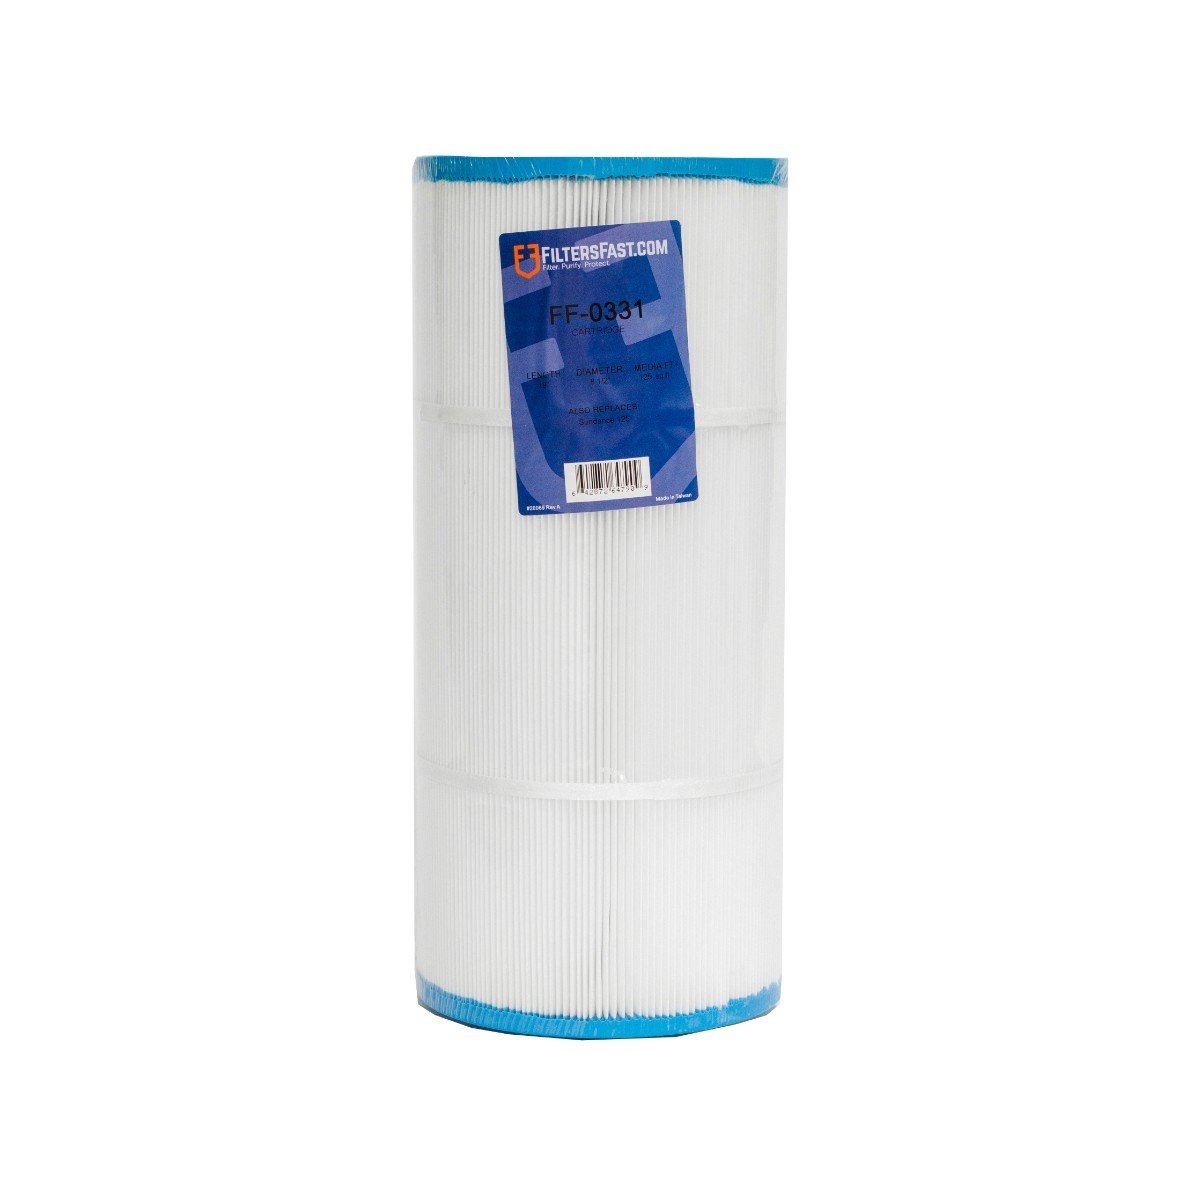 Filters Fast&reg; FF-0331 Replacement For Sundance&reg; Spa 6540-488